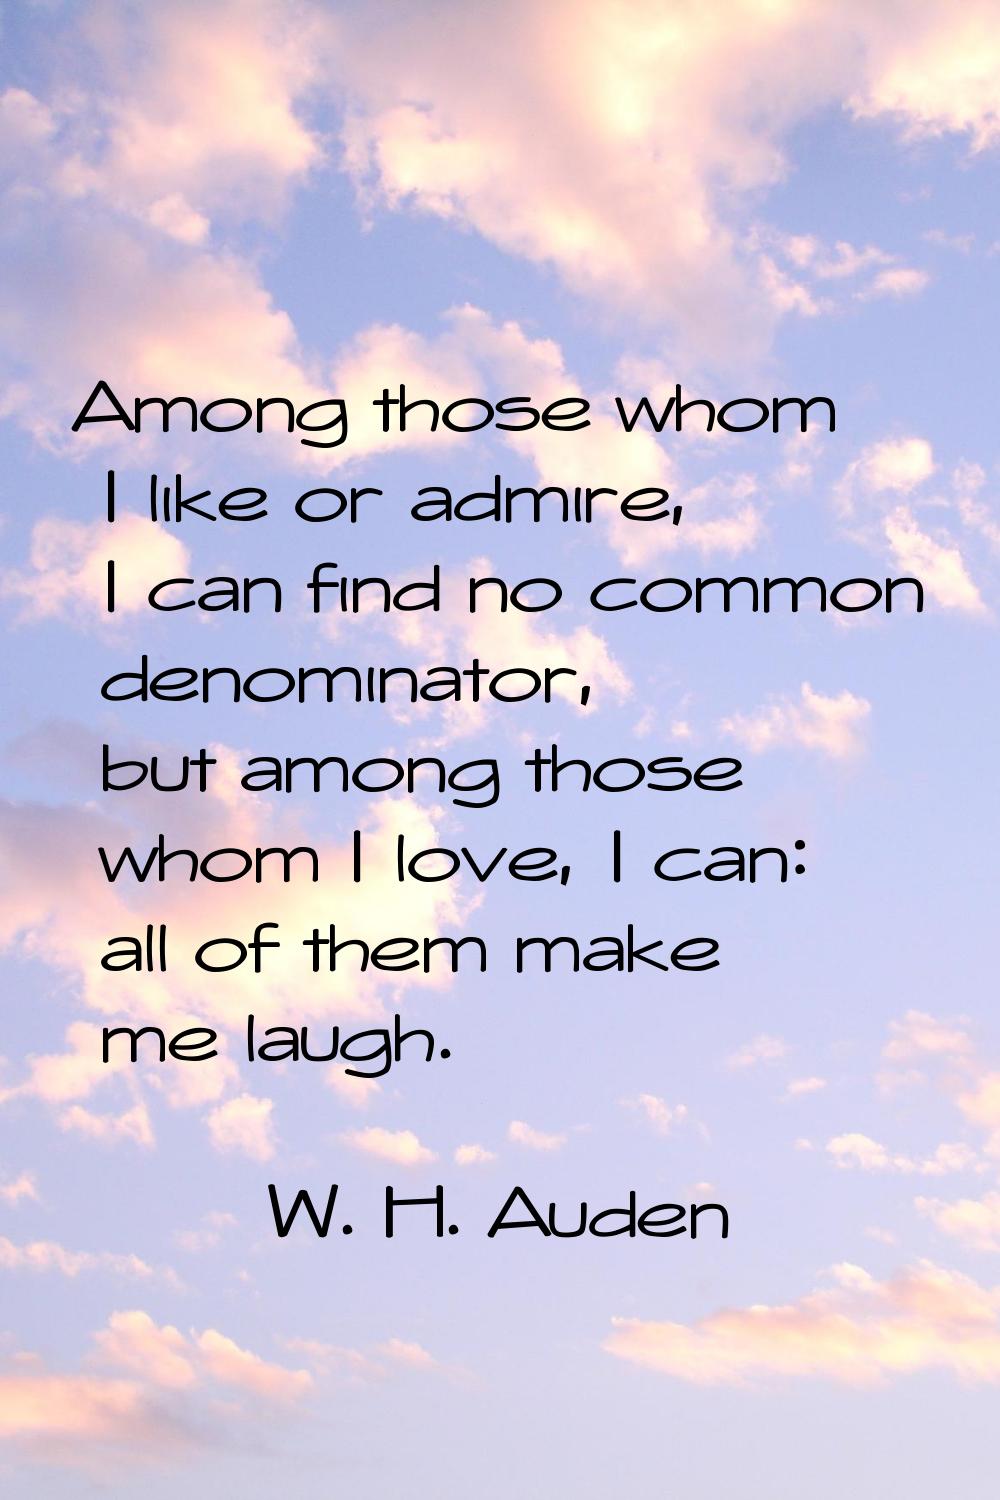 Among those whom I like or admire, I can find no common denominator, but among those whom I love, I